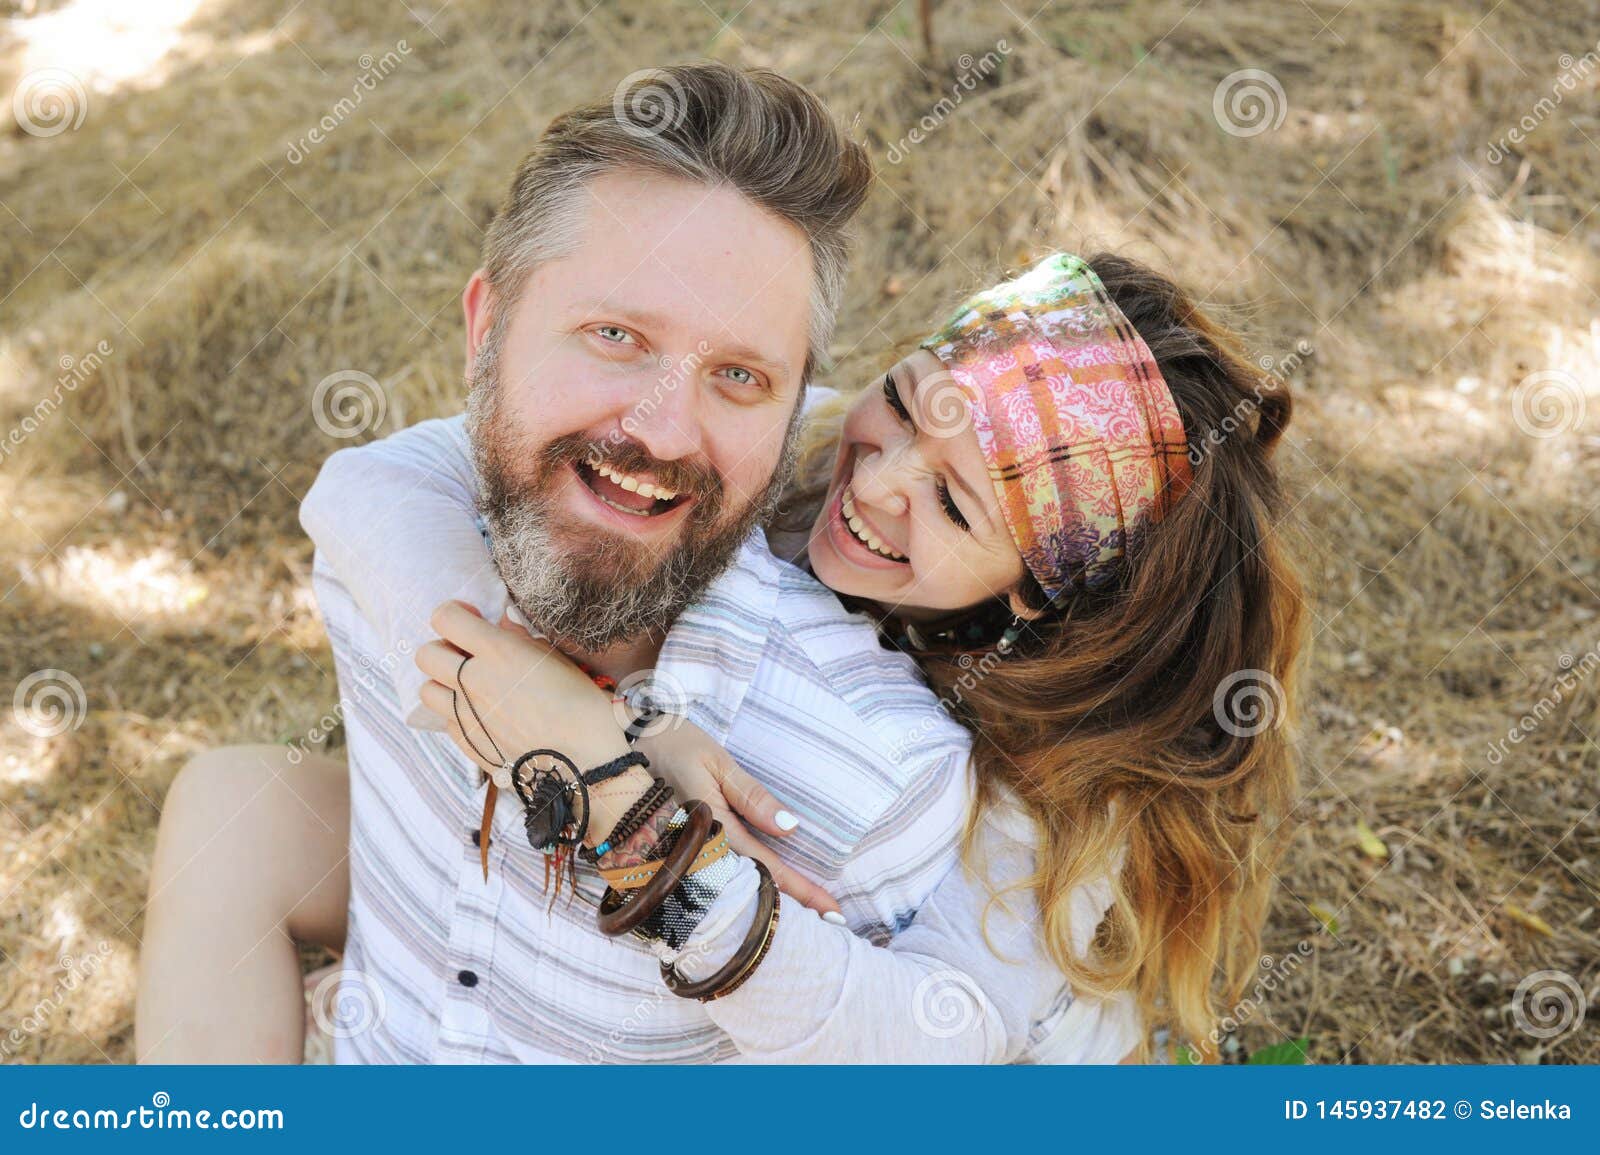 Indie Style Smiling Couple, Woman Embracing Man, Hipster Outfit, Boho Chic  Stock Image - Image of girlfriend, lifestyle: 144883743